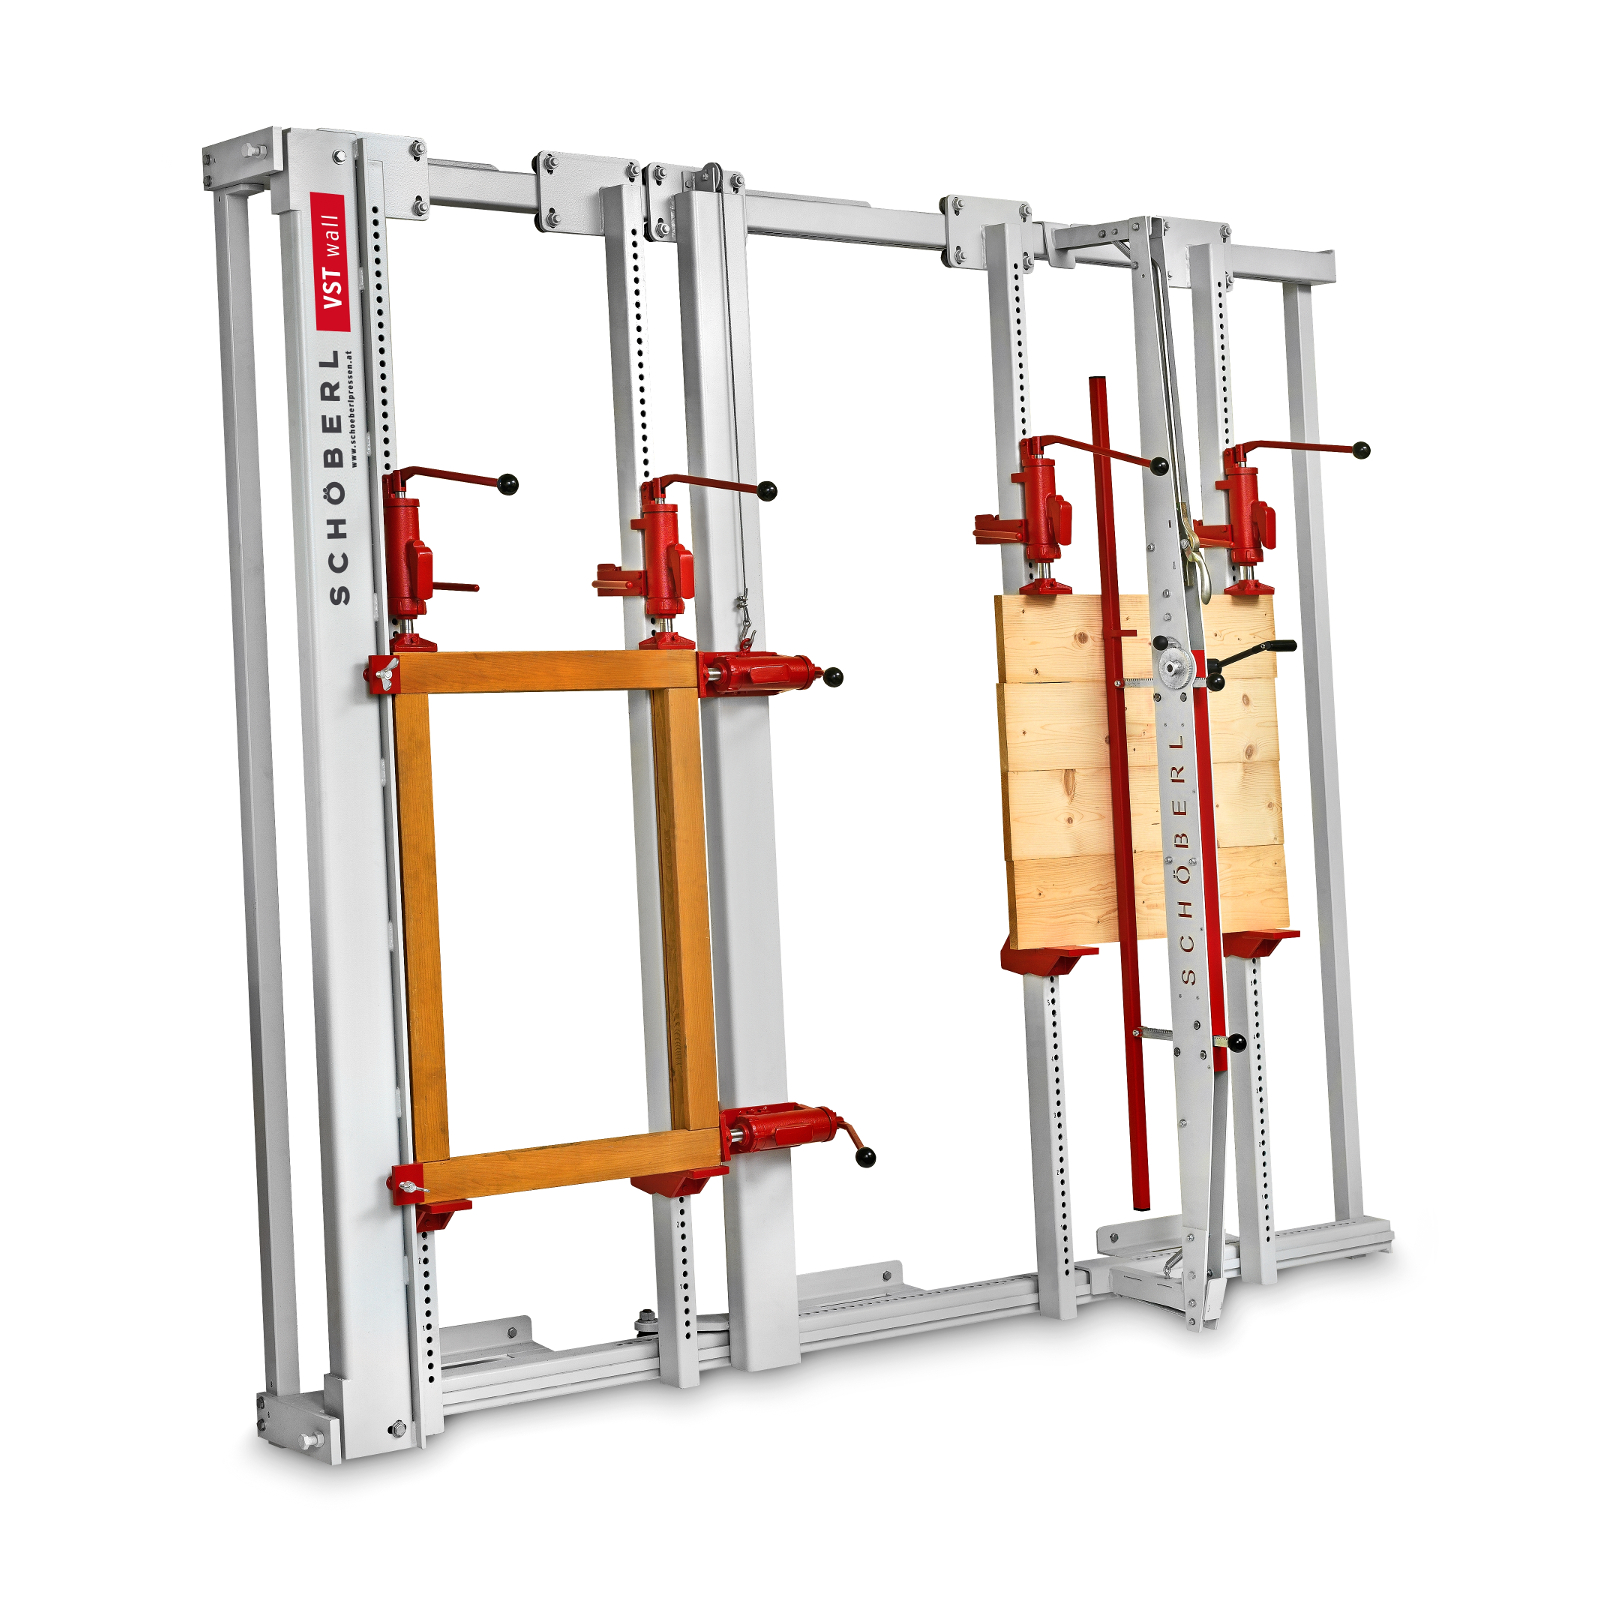 Wall-mounted gluing stand with frame press